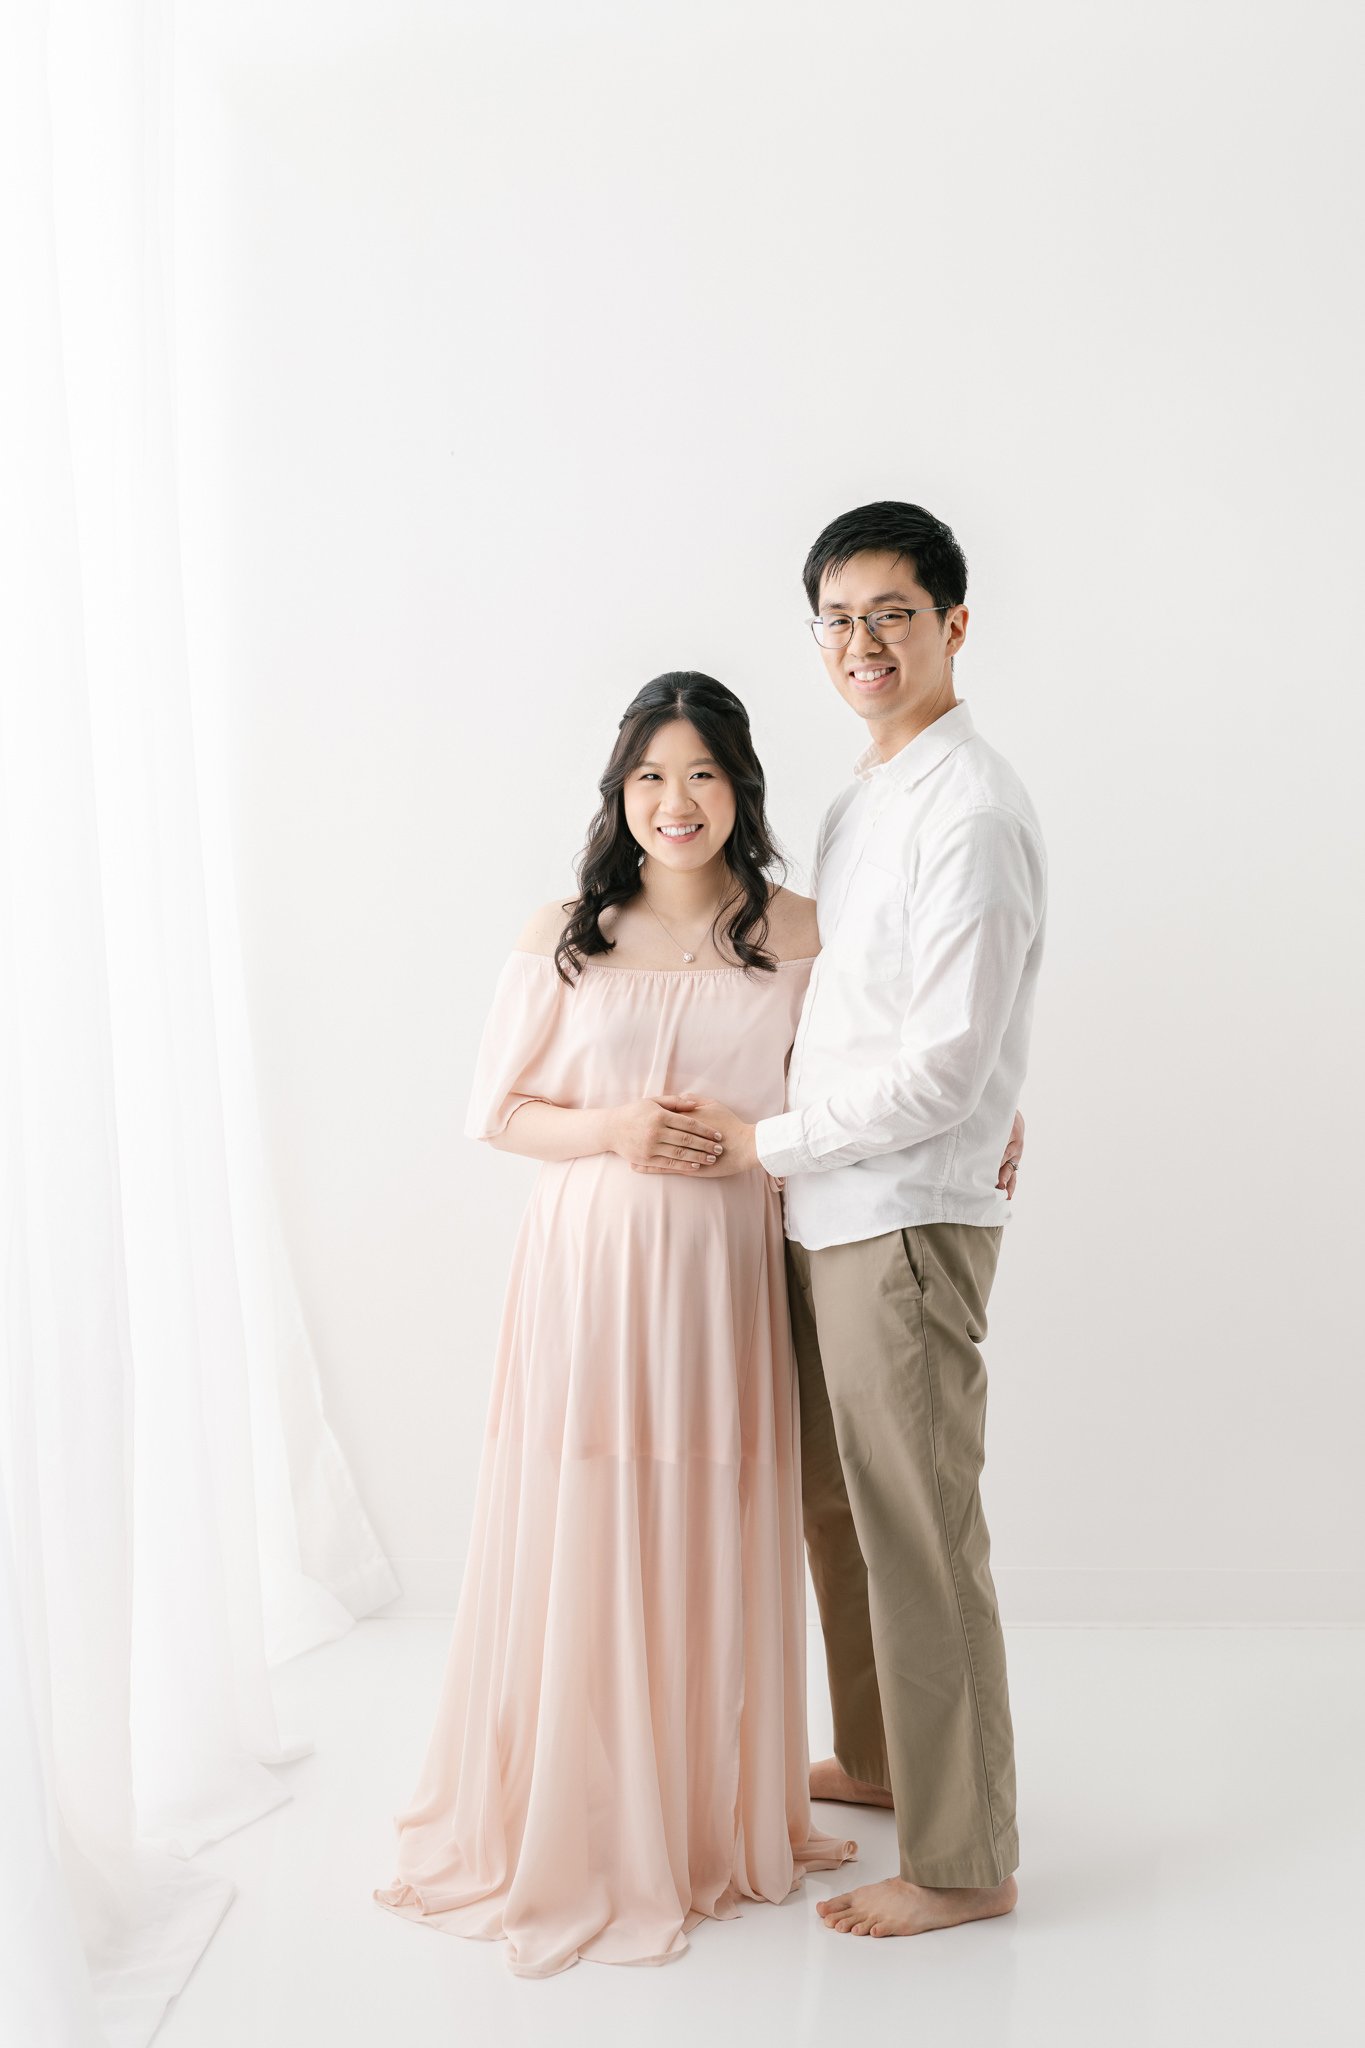  Studio maternity portraits in New Jersey with soon-to-be parents by Nicole Hawkins photography. pink maternity dress simple outfits for maternity #NicoleHawkinsPhotography #NicoleHawkinsMaternity #MaternityPhotography #Maternitystyle #NJMaternity #T